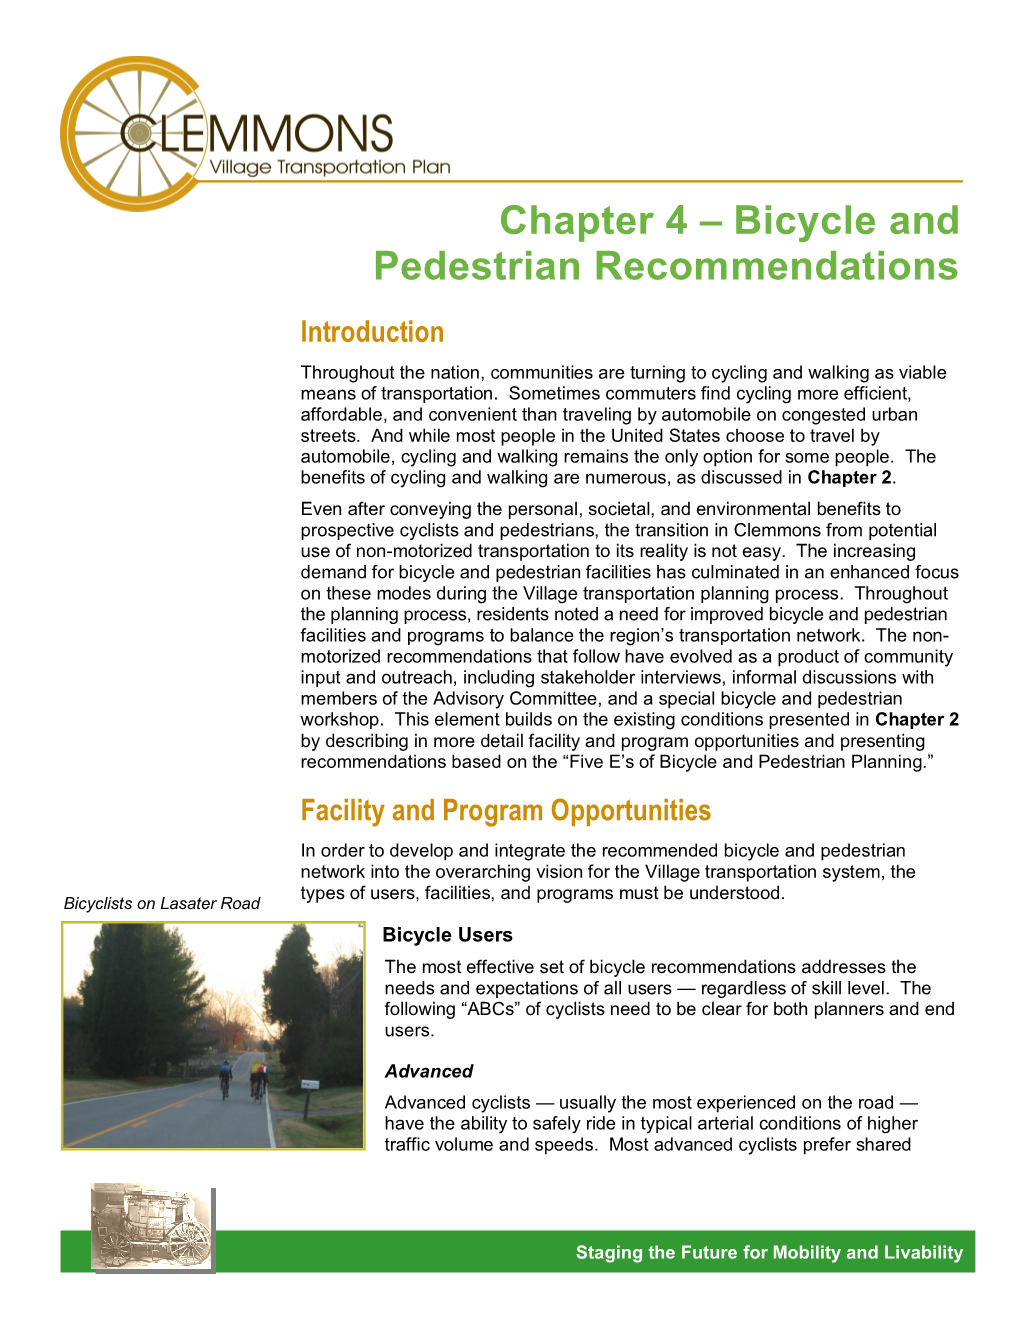 Chapter 4 – Bicycle and Pedestrian Recommendations